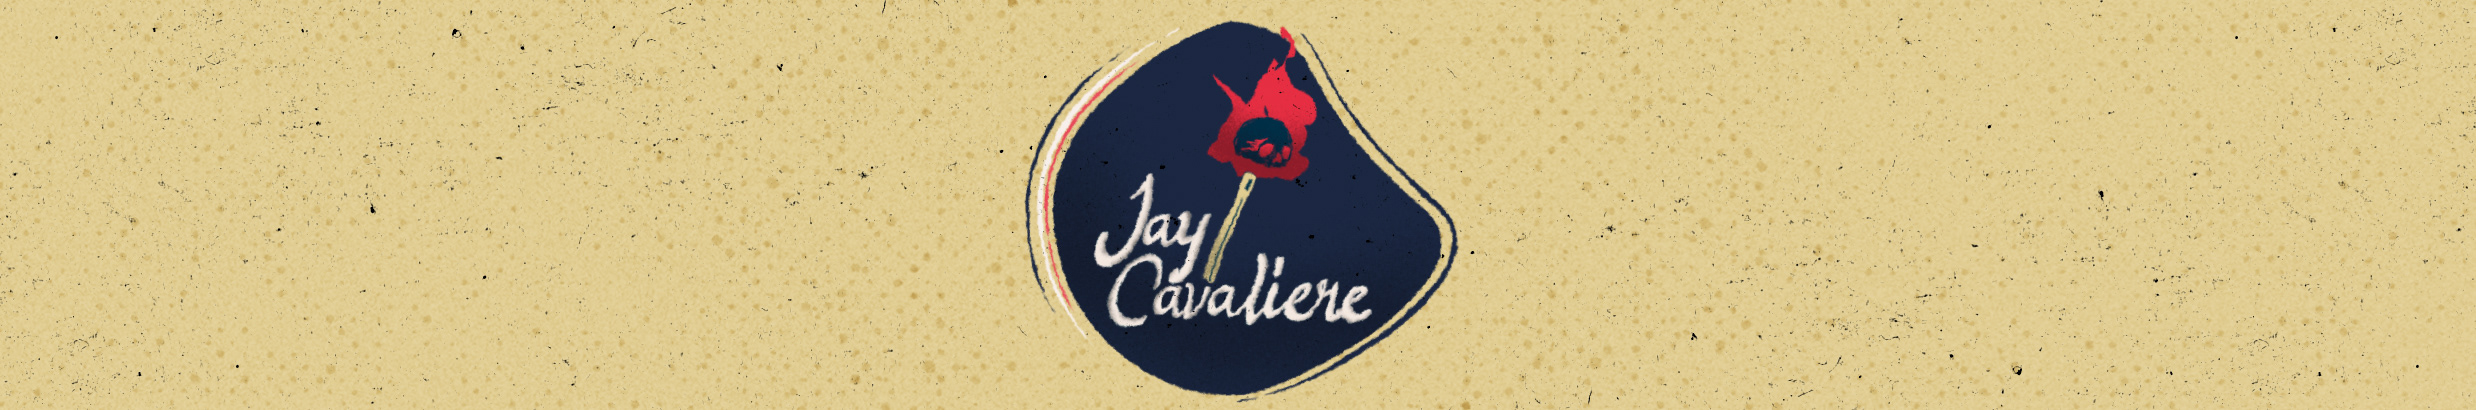 Jay Cavaliere's profile banner